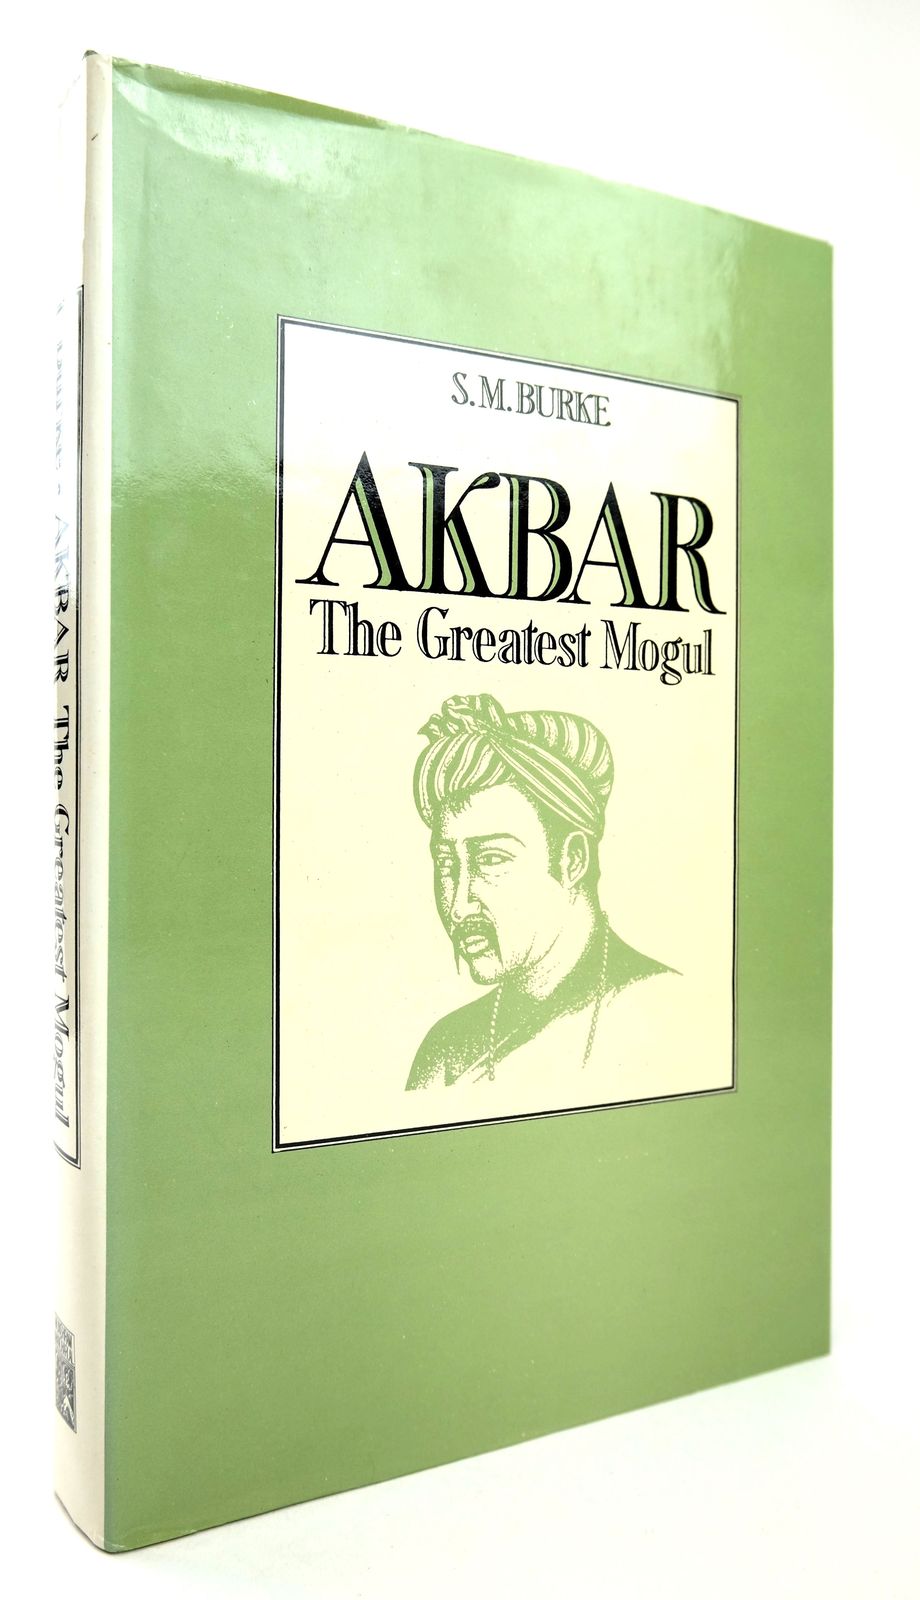 Photo of AKBAR THE GREATEST MOGUL written by Burke, S.M. published by Munshiram Manoharlal (STOCK CODE: 1818763)  for sale by Stella & Rose's Books